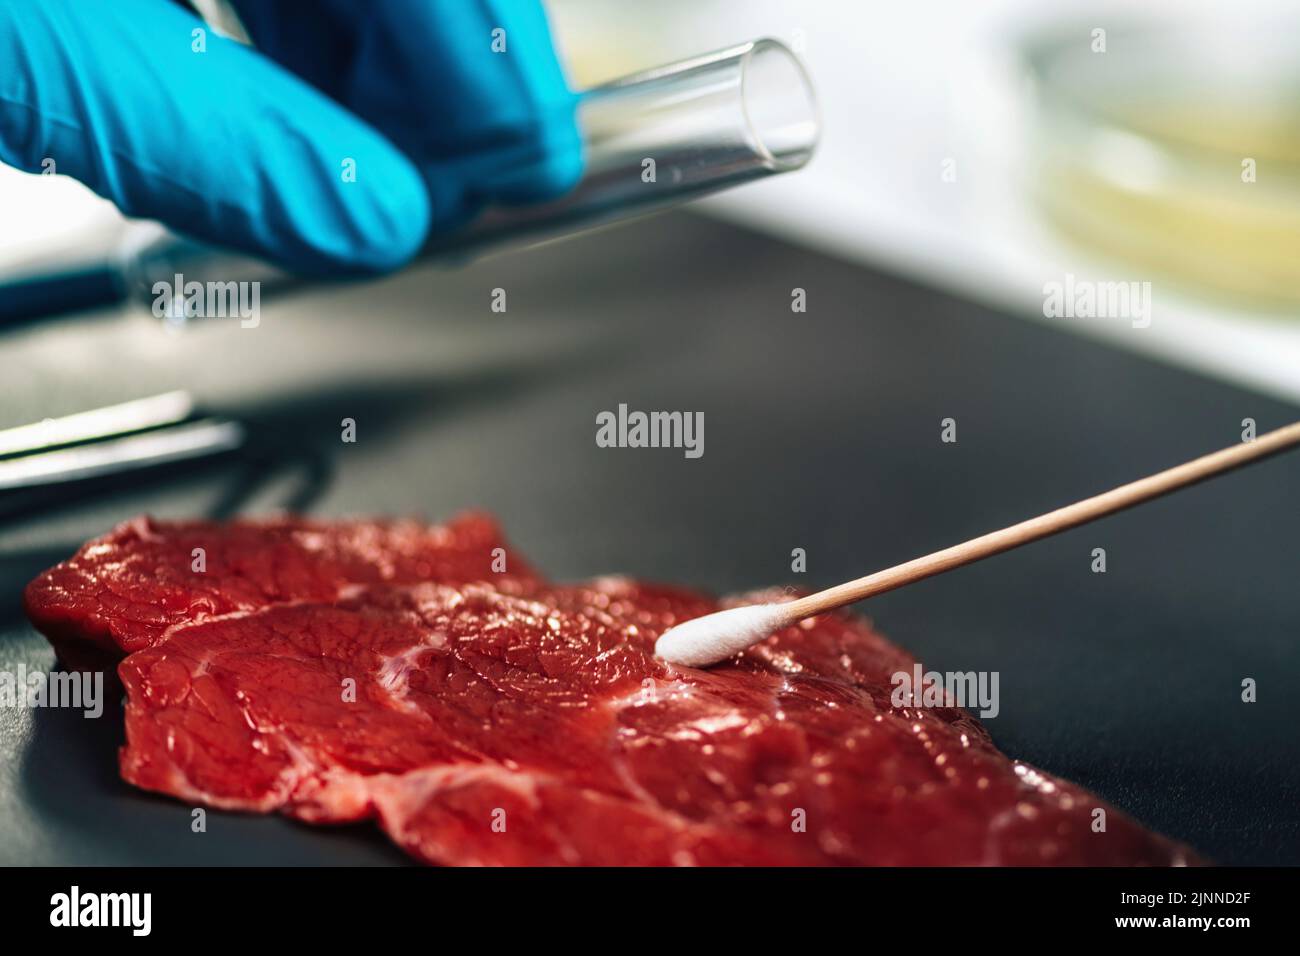 Quality control inspector taking red meat sample Stock Photo